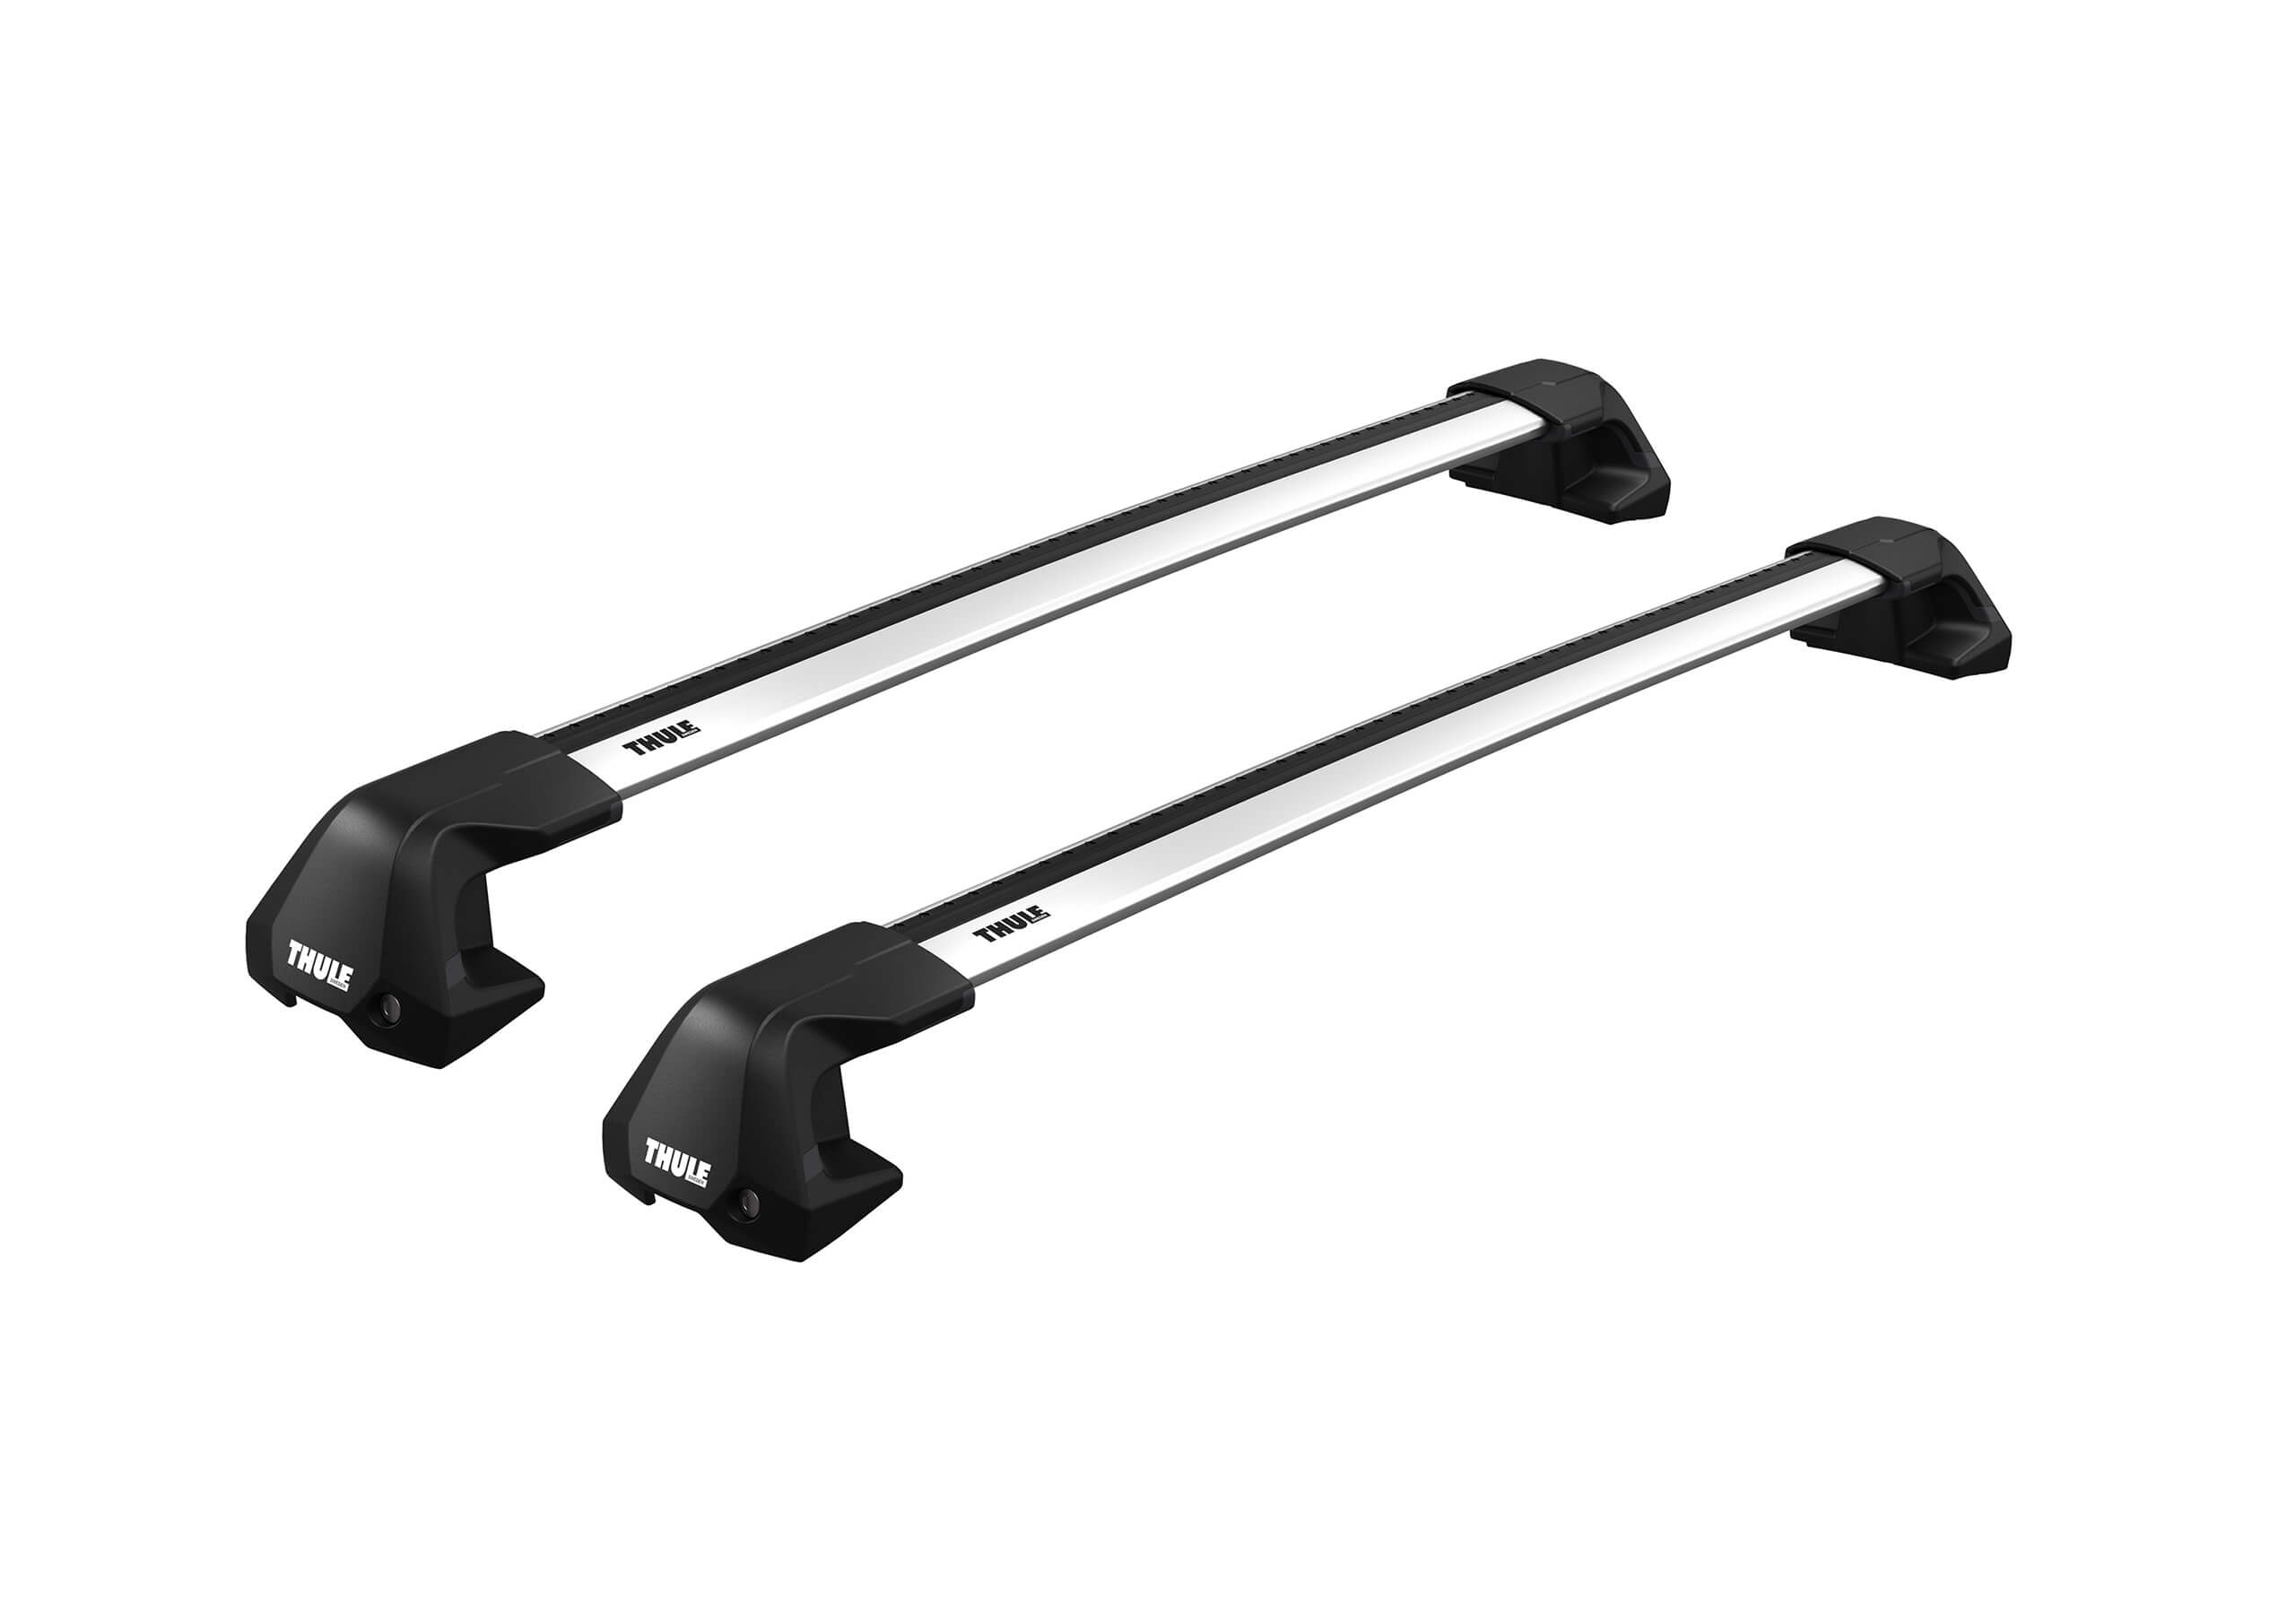 Citroen C4 Grand Picasso (2014 to 2018):Thule Edge silver WingBars package - 7205, 7215 x 2, 5035